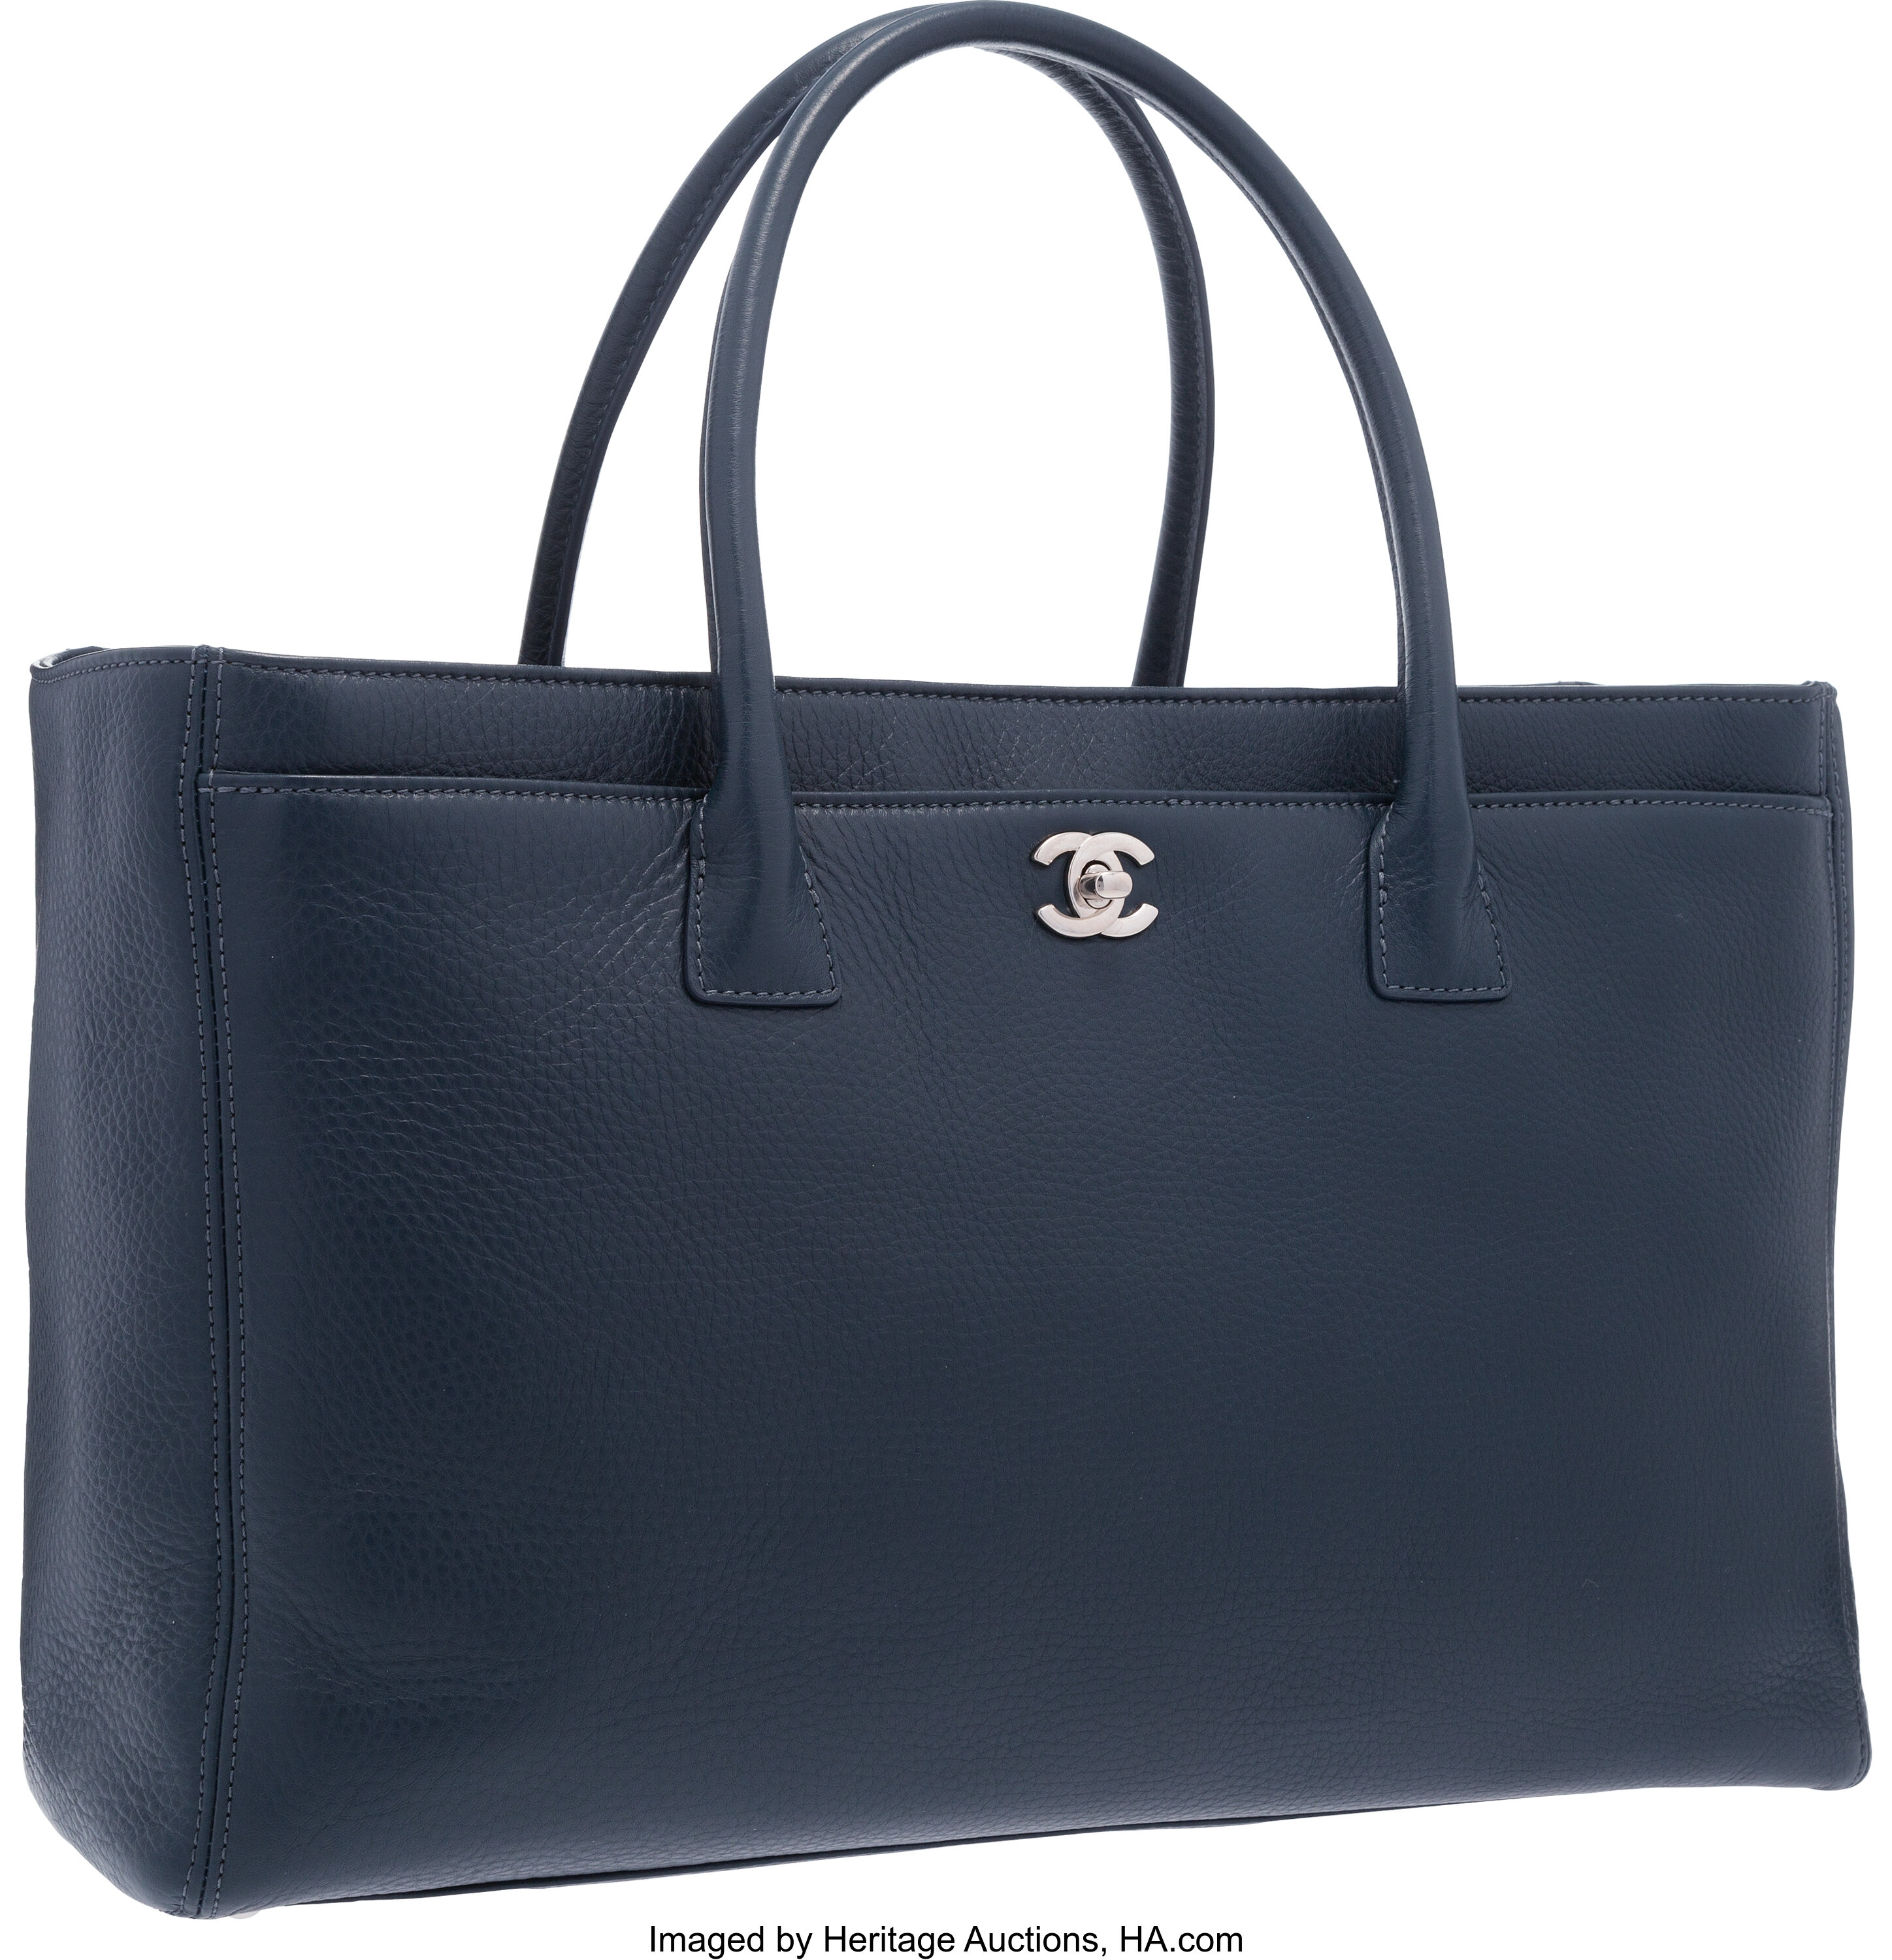 Chanel Navy Blue Leather Cerf Tote Bag with Silver Hardware.